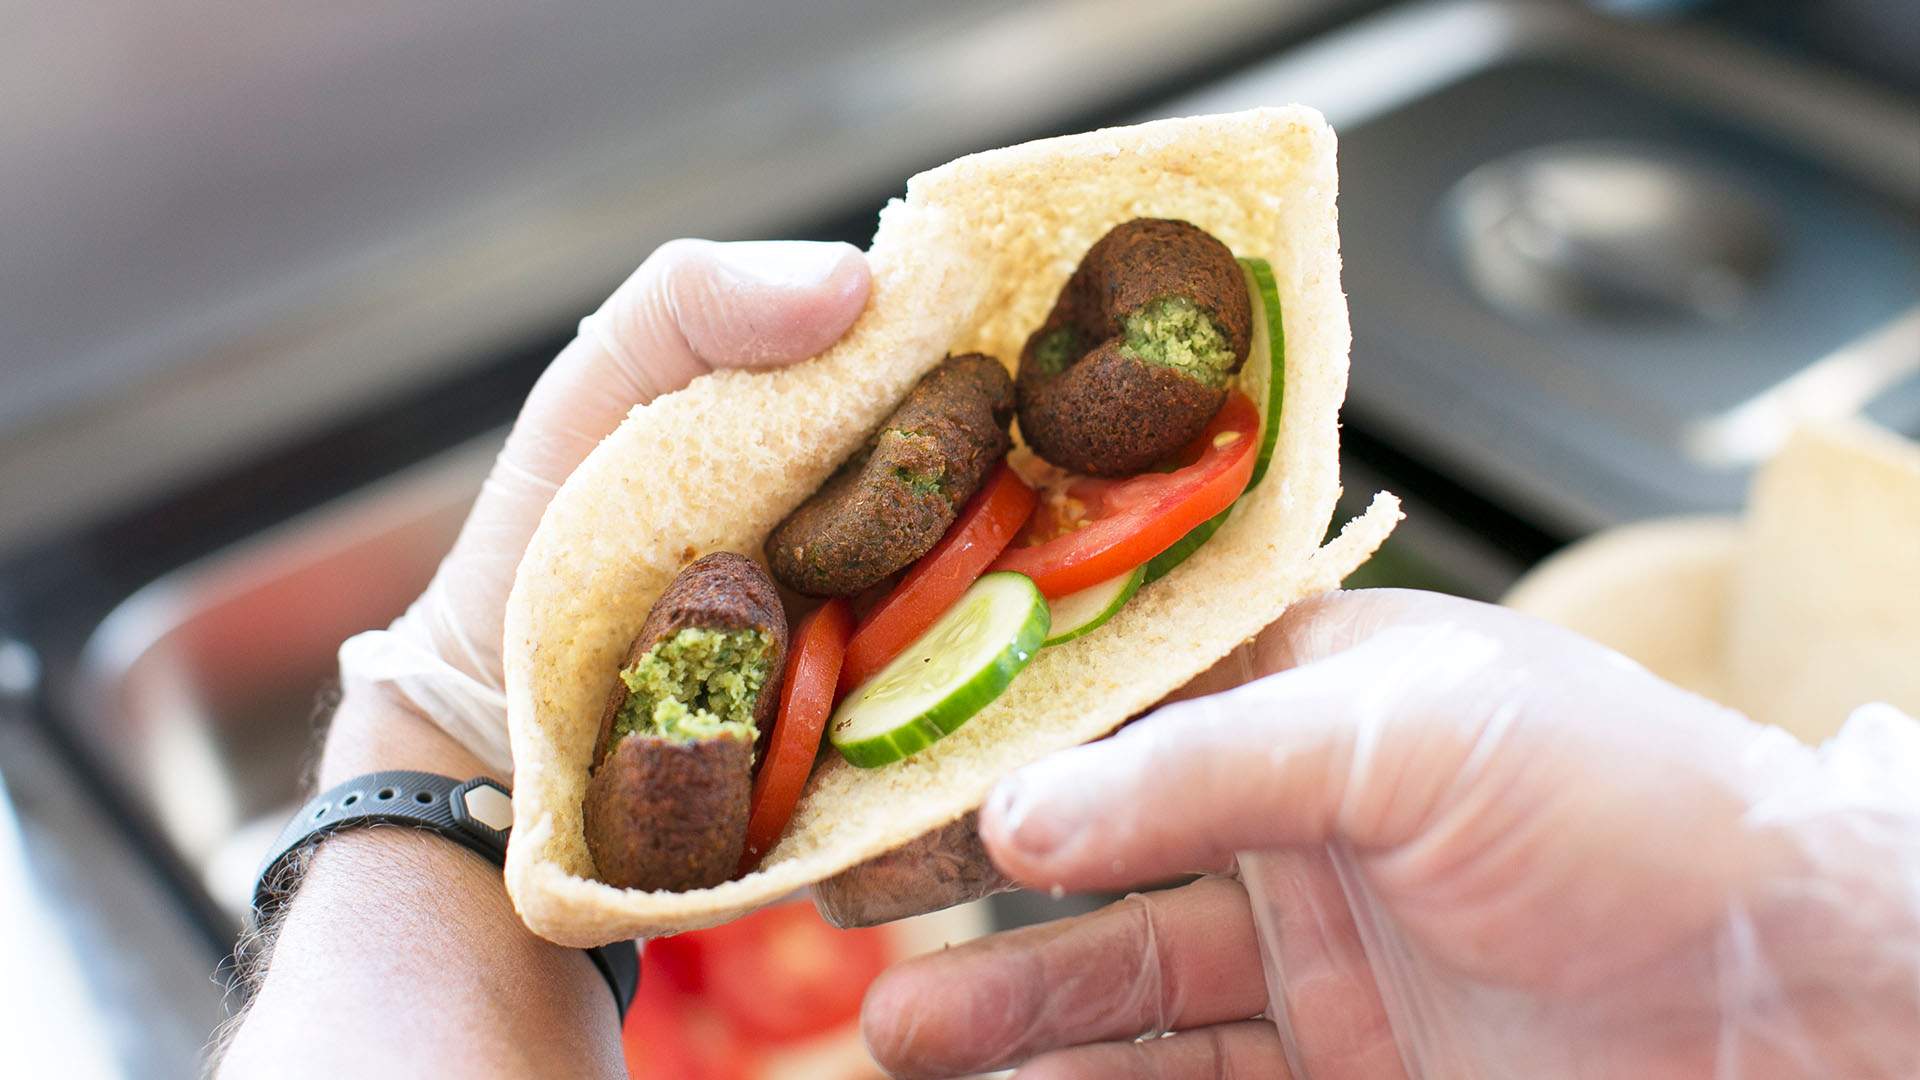 El Qahirah Is Sydney's First Authentic Egyptian Food Truck